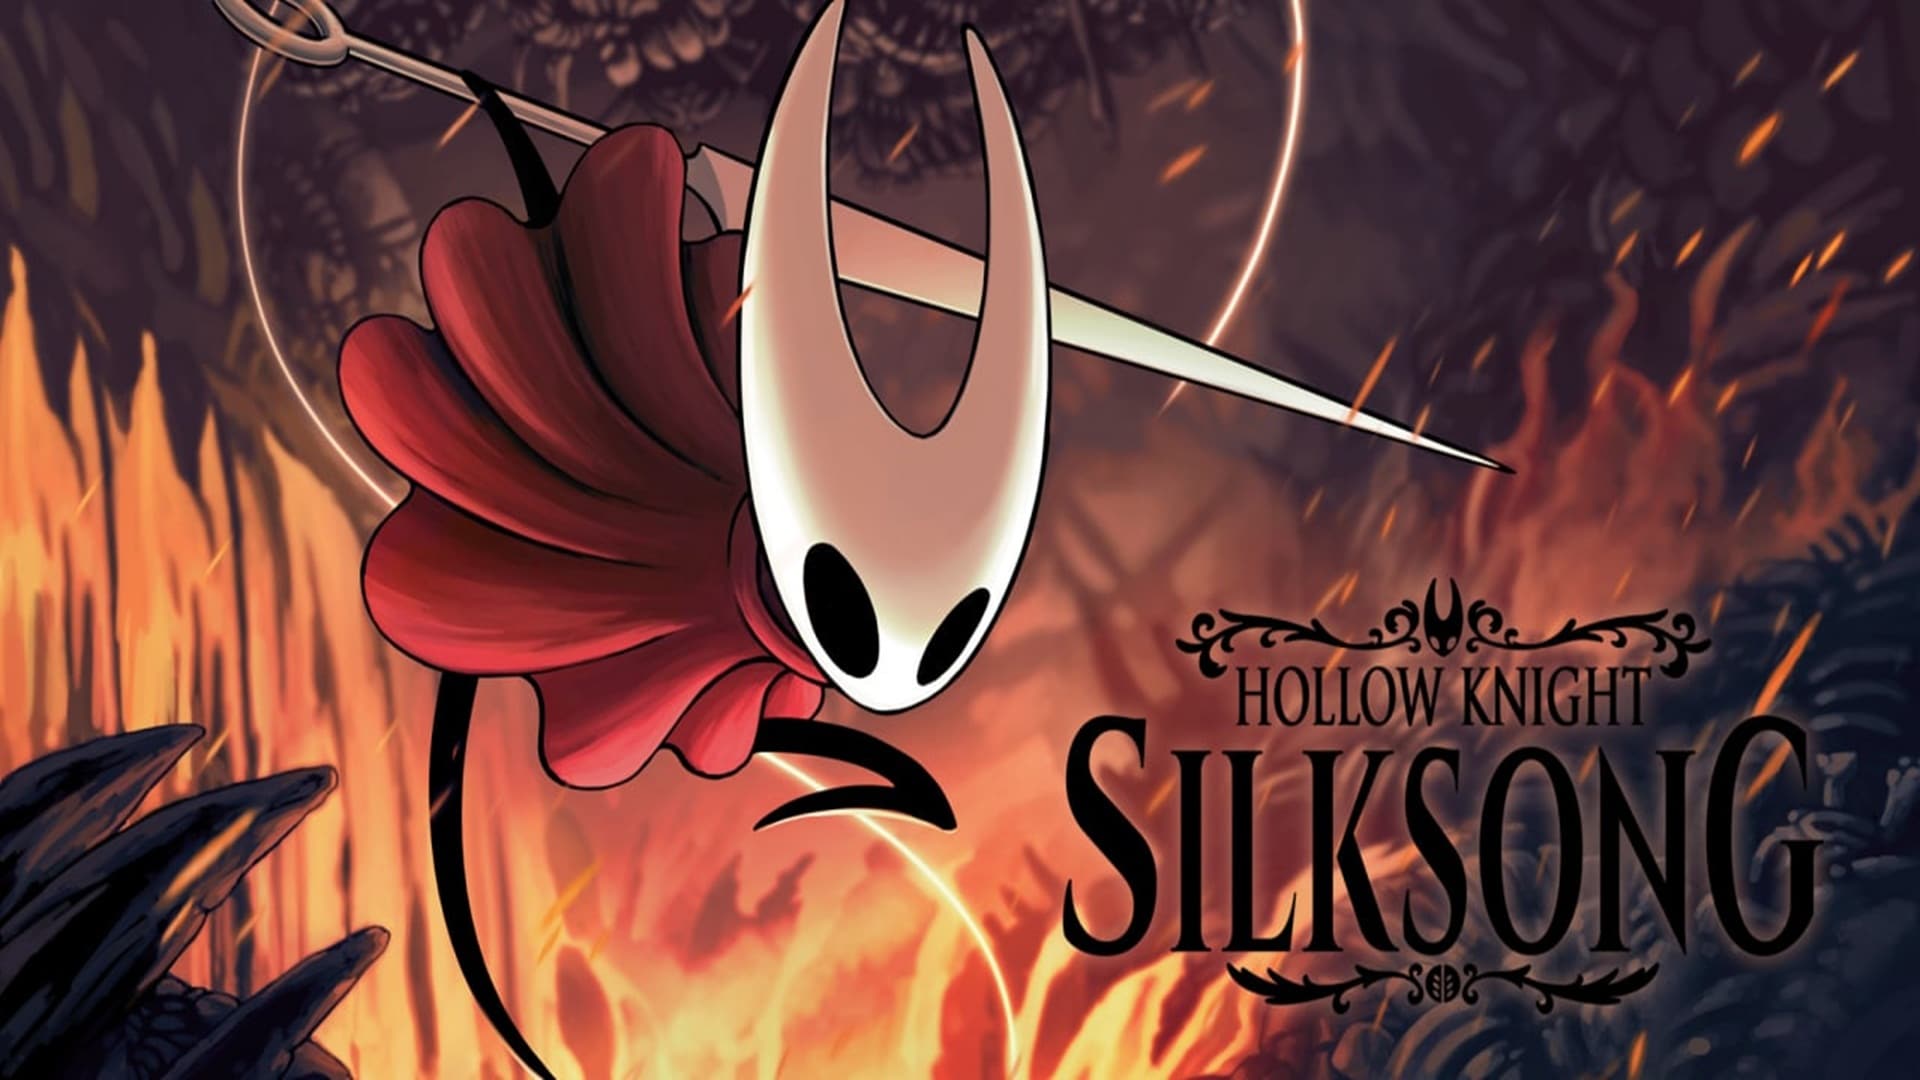 Hollow Knight: Silksong could arrive before June 2023, GamersRD